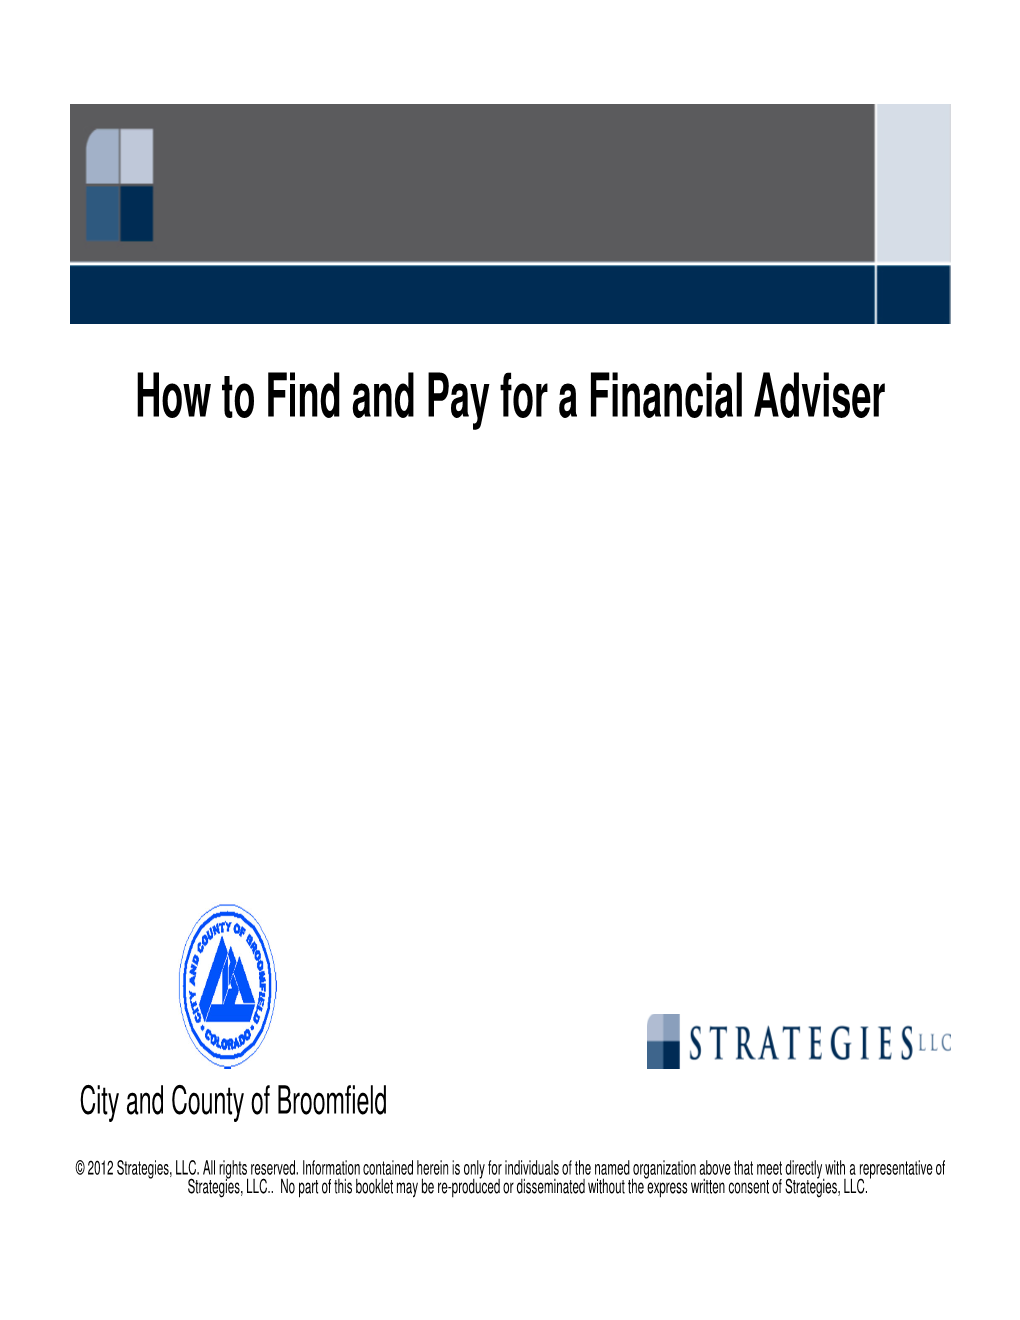 How to Find and Pay for a Financial Adviser